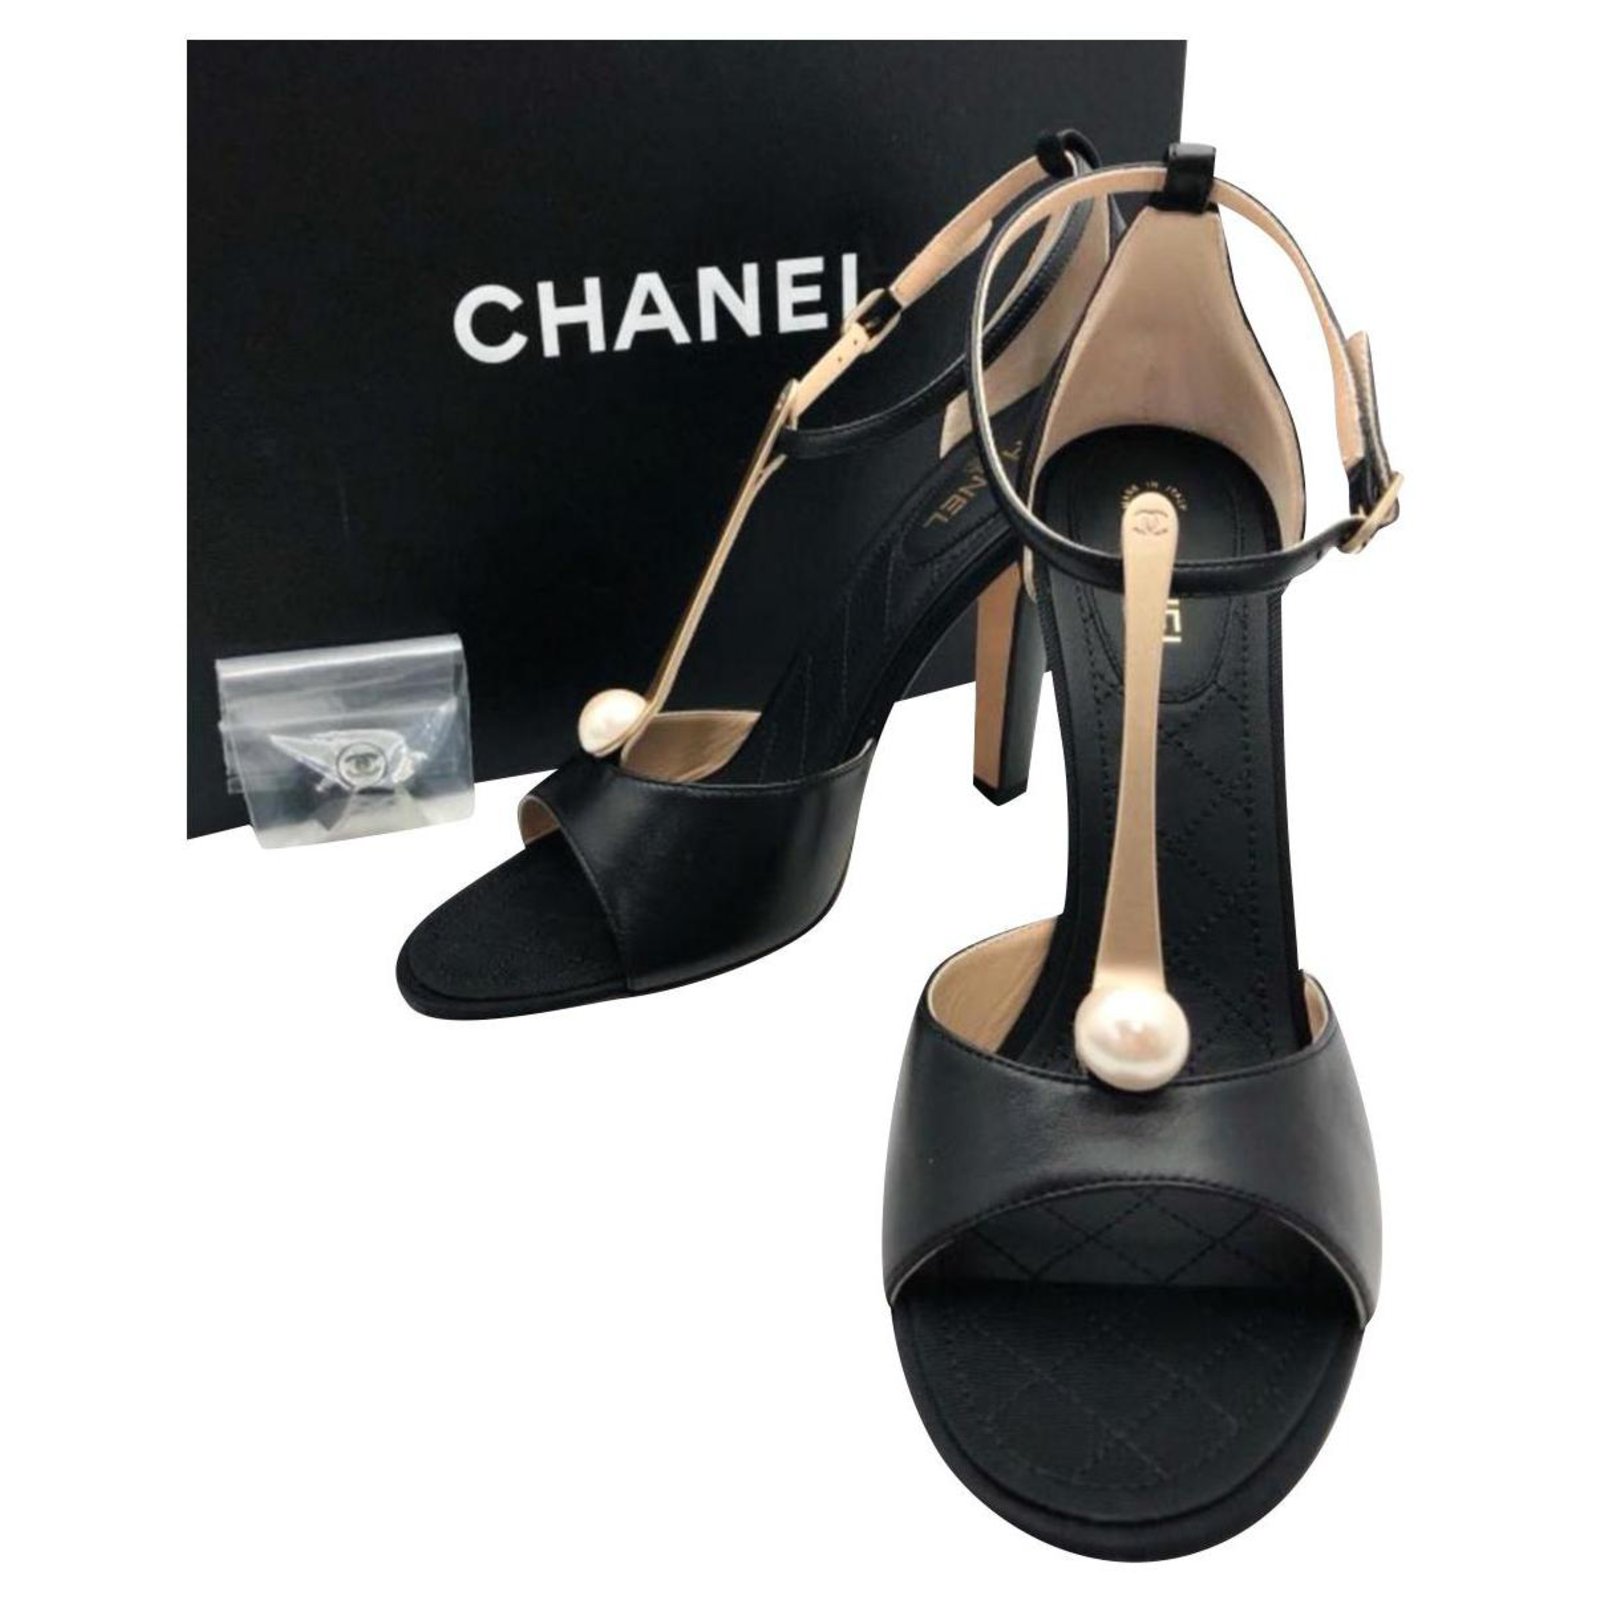 Chanel Black Satin Pearl Embellished CC Pumps  Toronto Consignment